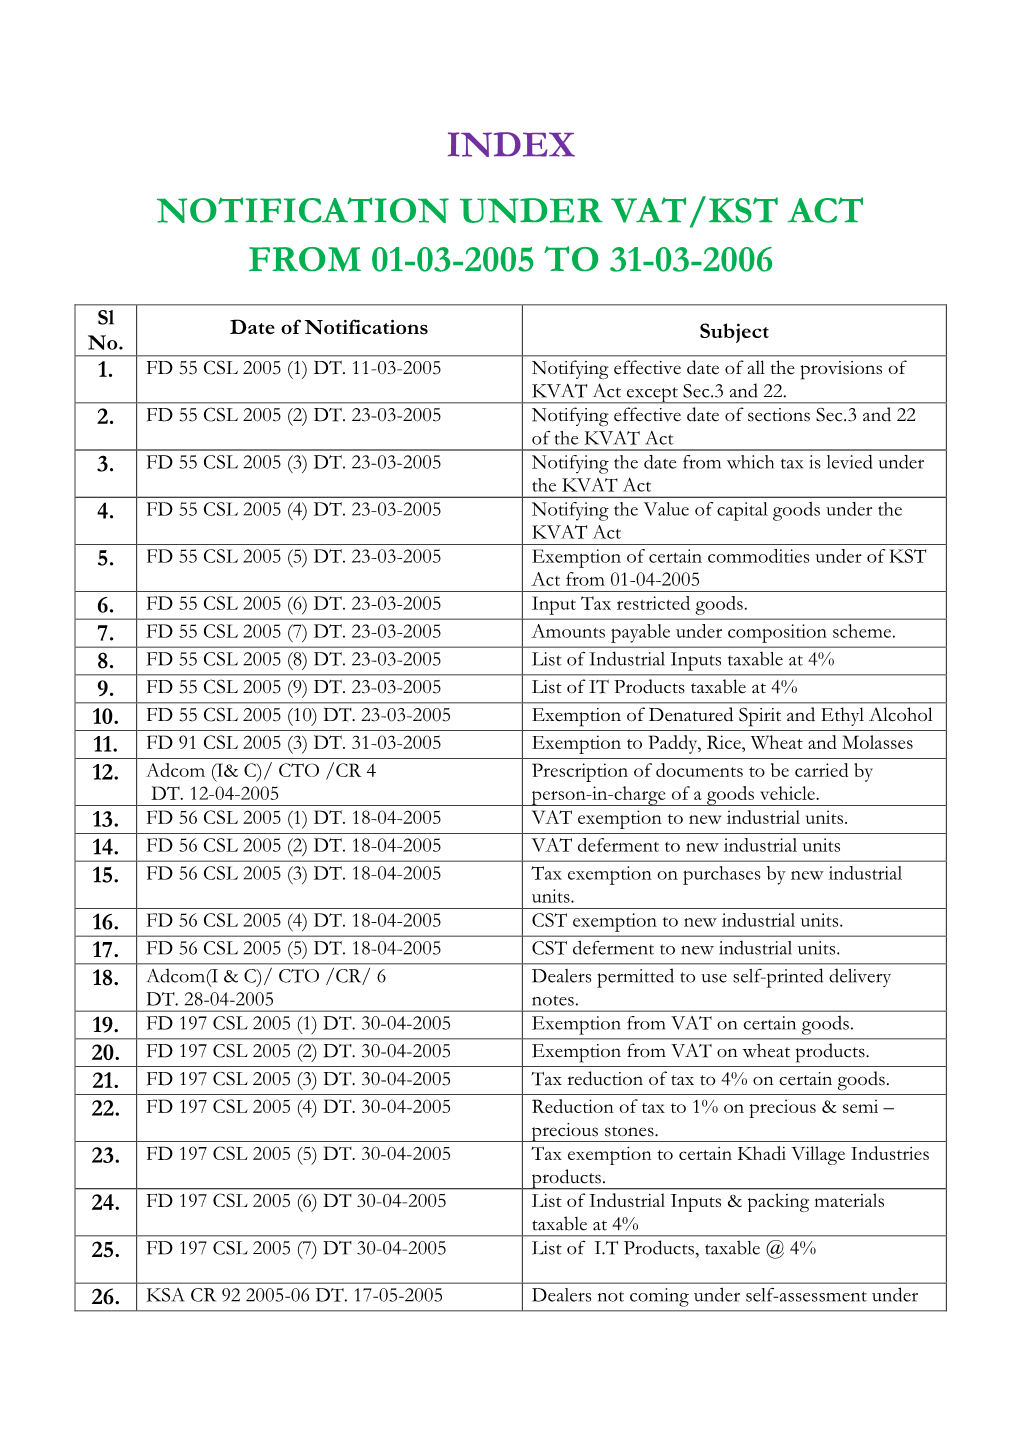 Notification Under Vat/Kst Act from 01-03-2005 to 31-03-2006